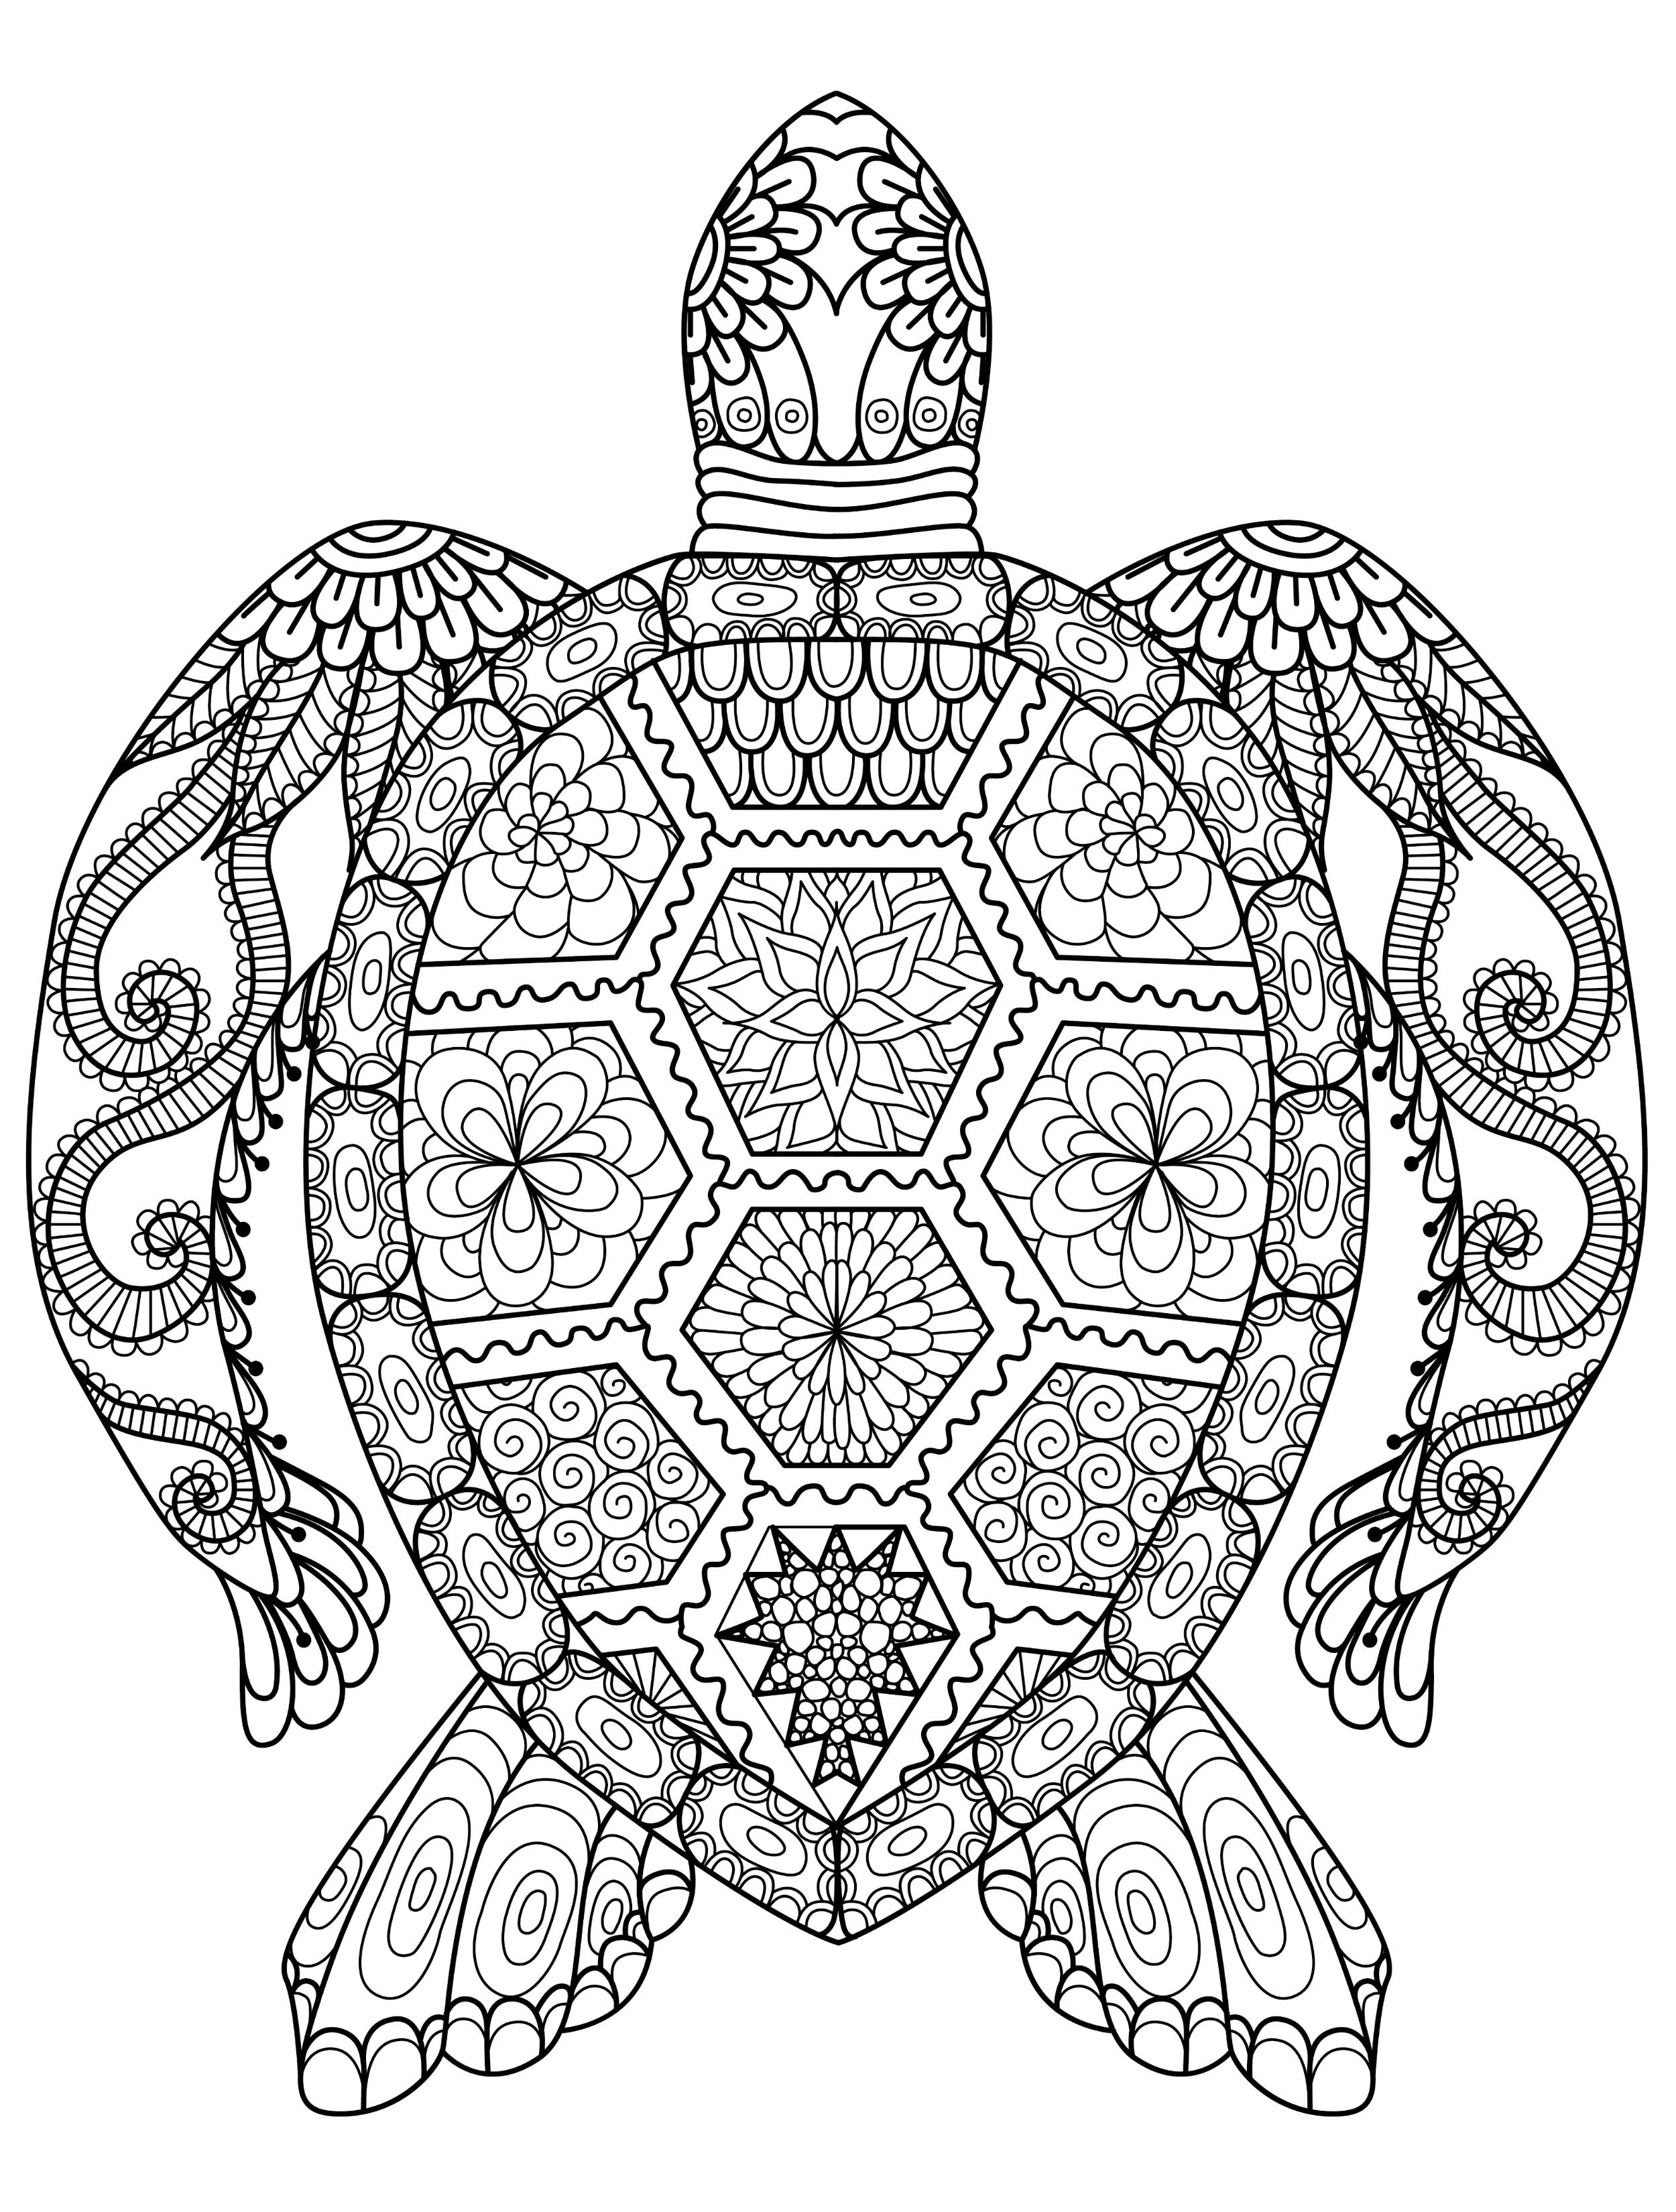 Great Animal Coloring Pages For Adults 52 For Your Free Coloring Kids with Animal Coloring Pages